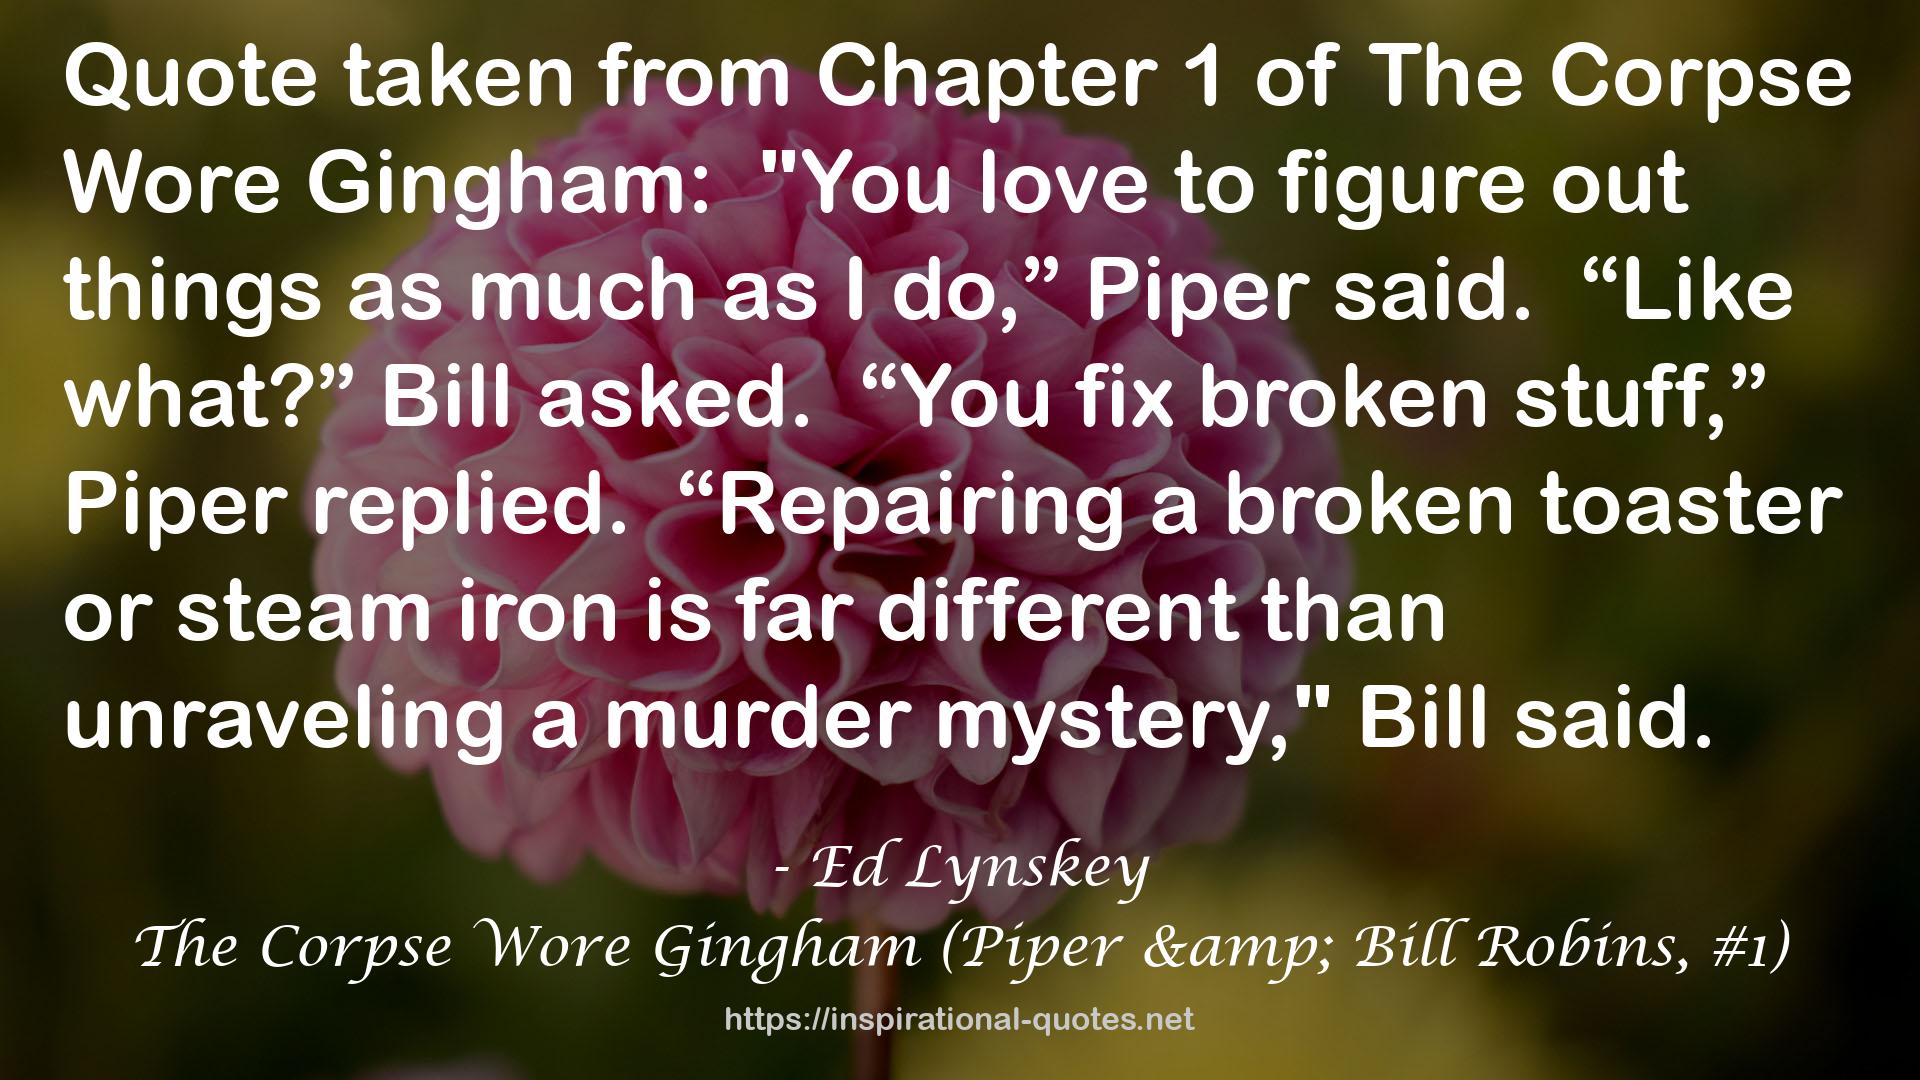 The Corpse Wore Gingham (Piper & Bill Robins, #1) QUOTES